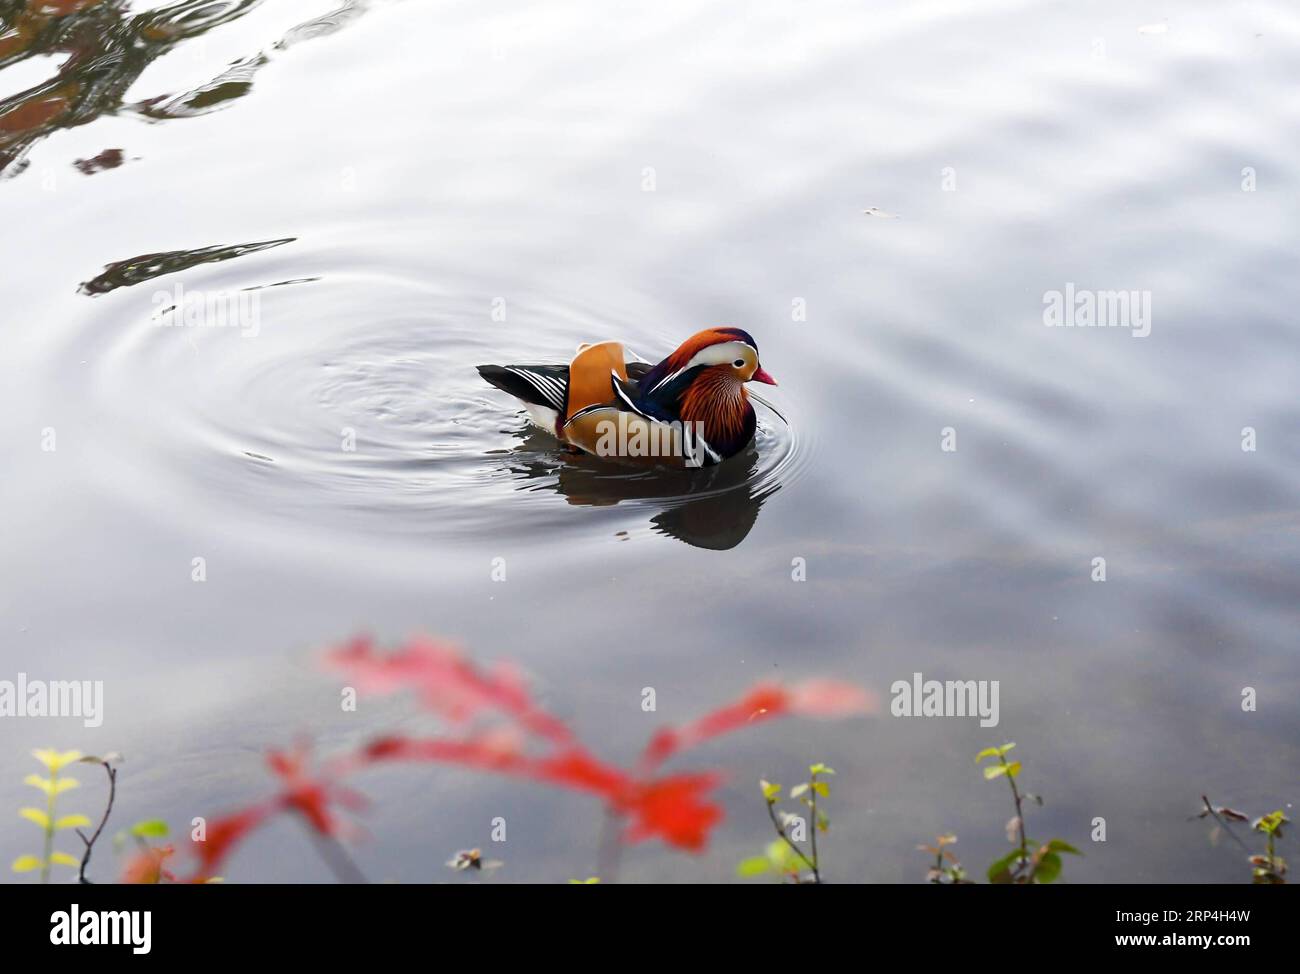 (181109) -- NEW YORK, Nov. 9, 2018 -- A Mandarin duck swims on a pond at the Central Park in New York, the United States, on Nov. 8, 2018. Mandarin ducks are native to East Asia and renowned for their dazzling multicolored feathers. This rare Mandarin duck, first spotted in early October, has become a new star at the Central Park, one of New York City s most-visited attractions. ) (yk) U.S.-NEW YORK-MANDARIN DUCK LixRui PUBLICATIONxNOTxINxCHN Stock Photo